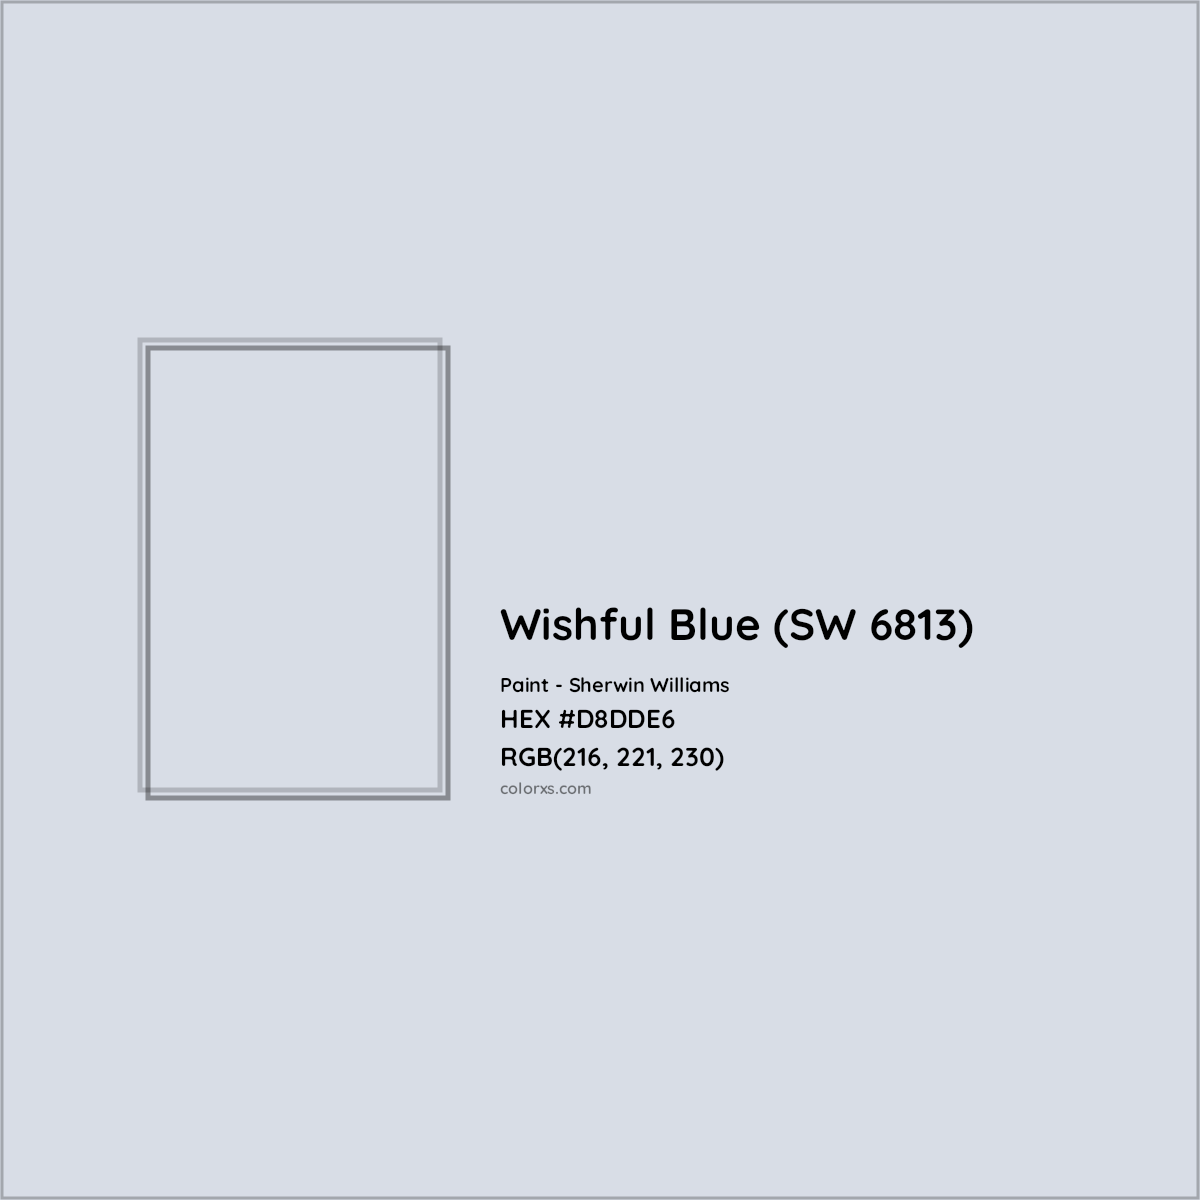 HEX #D8DDE6 Wishful Blue (SW 6813) Paint Sherwin Williams - Color Code